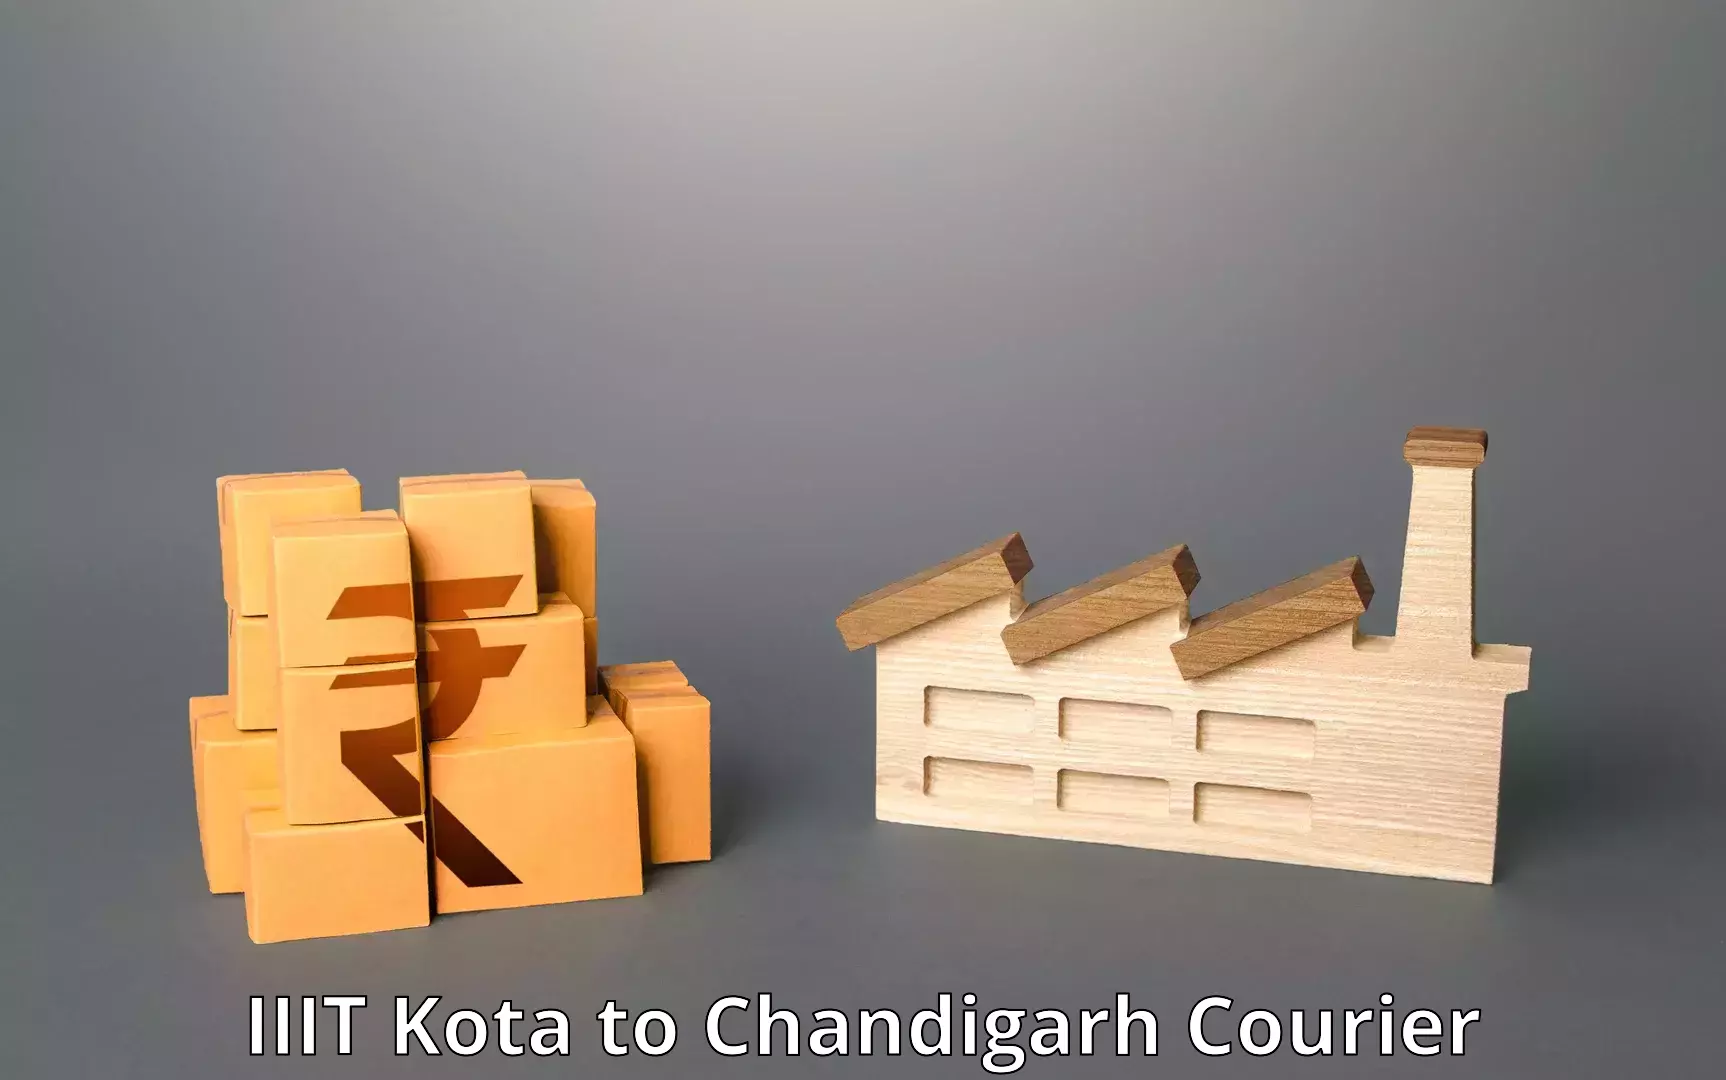 User-friendly delivery service IIIT Kota to Chandigarh